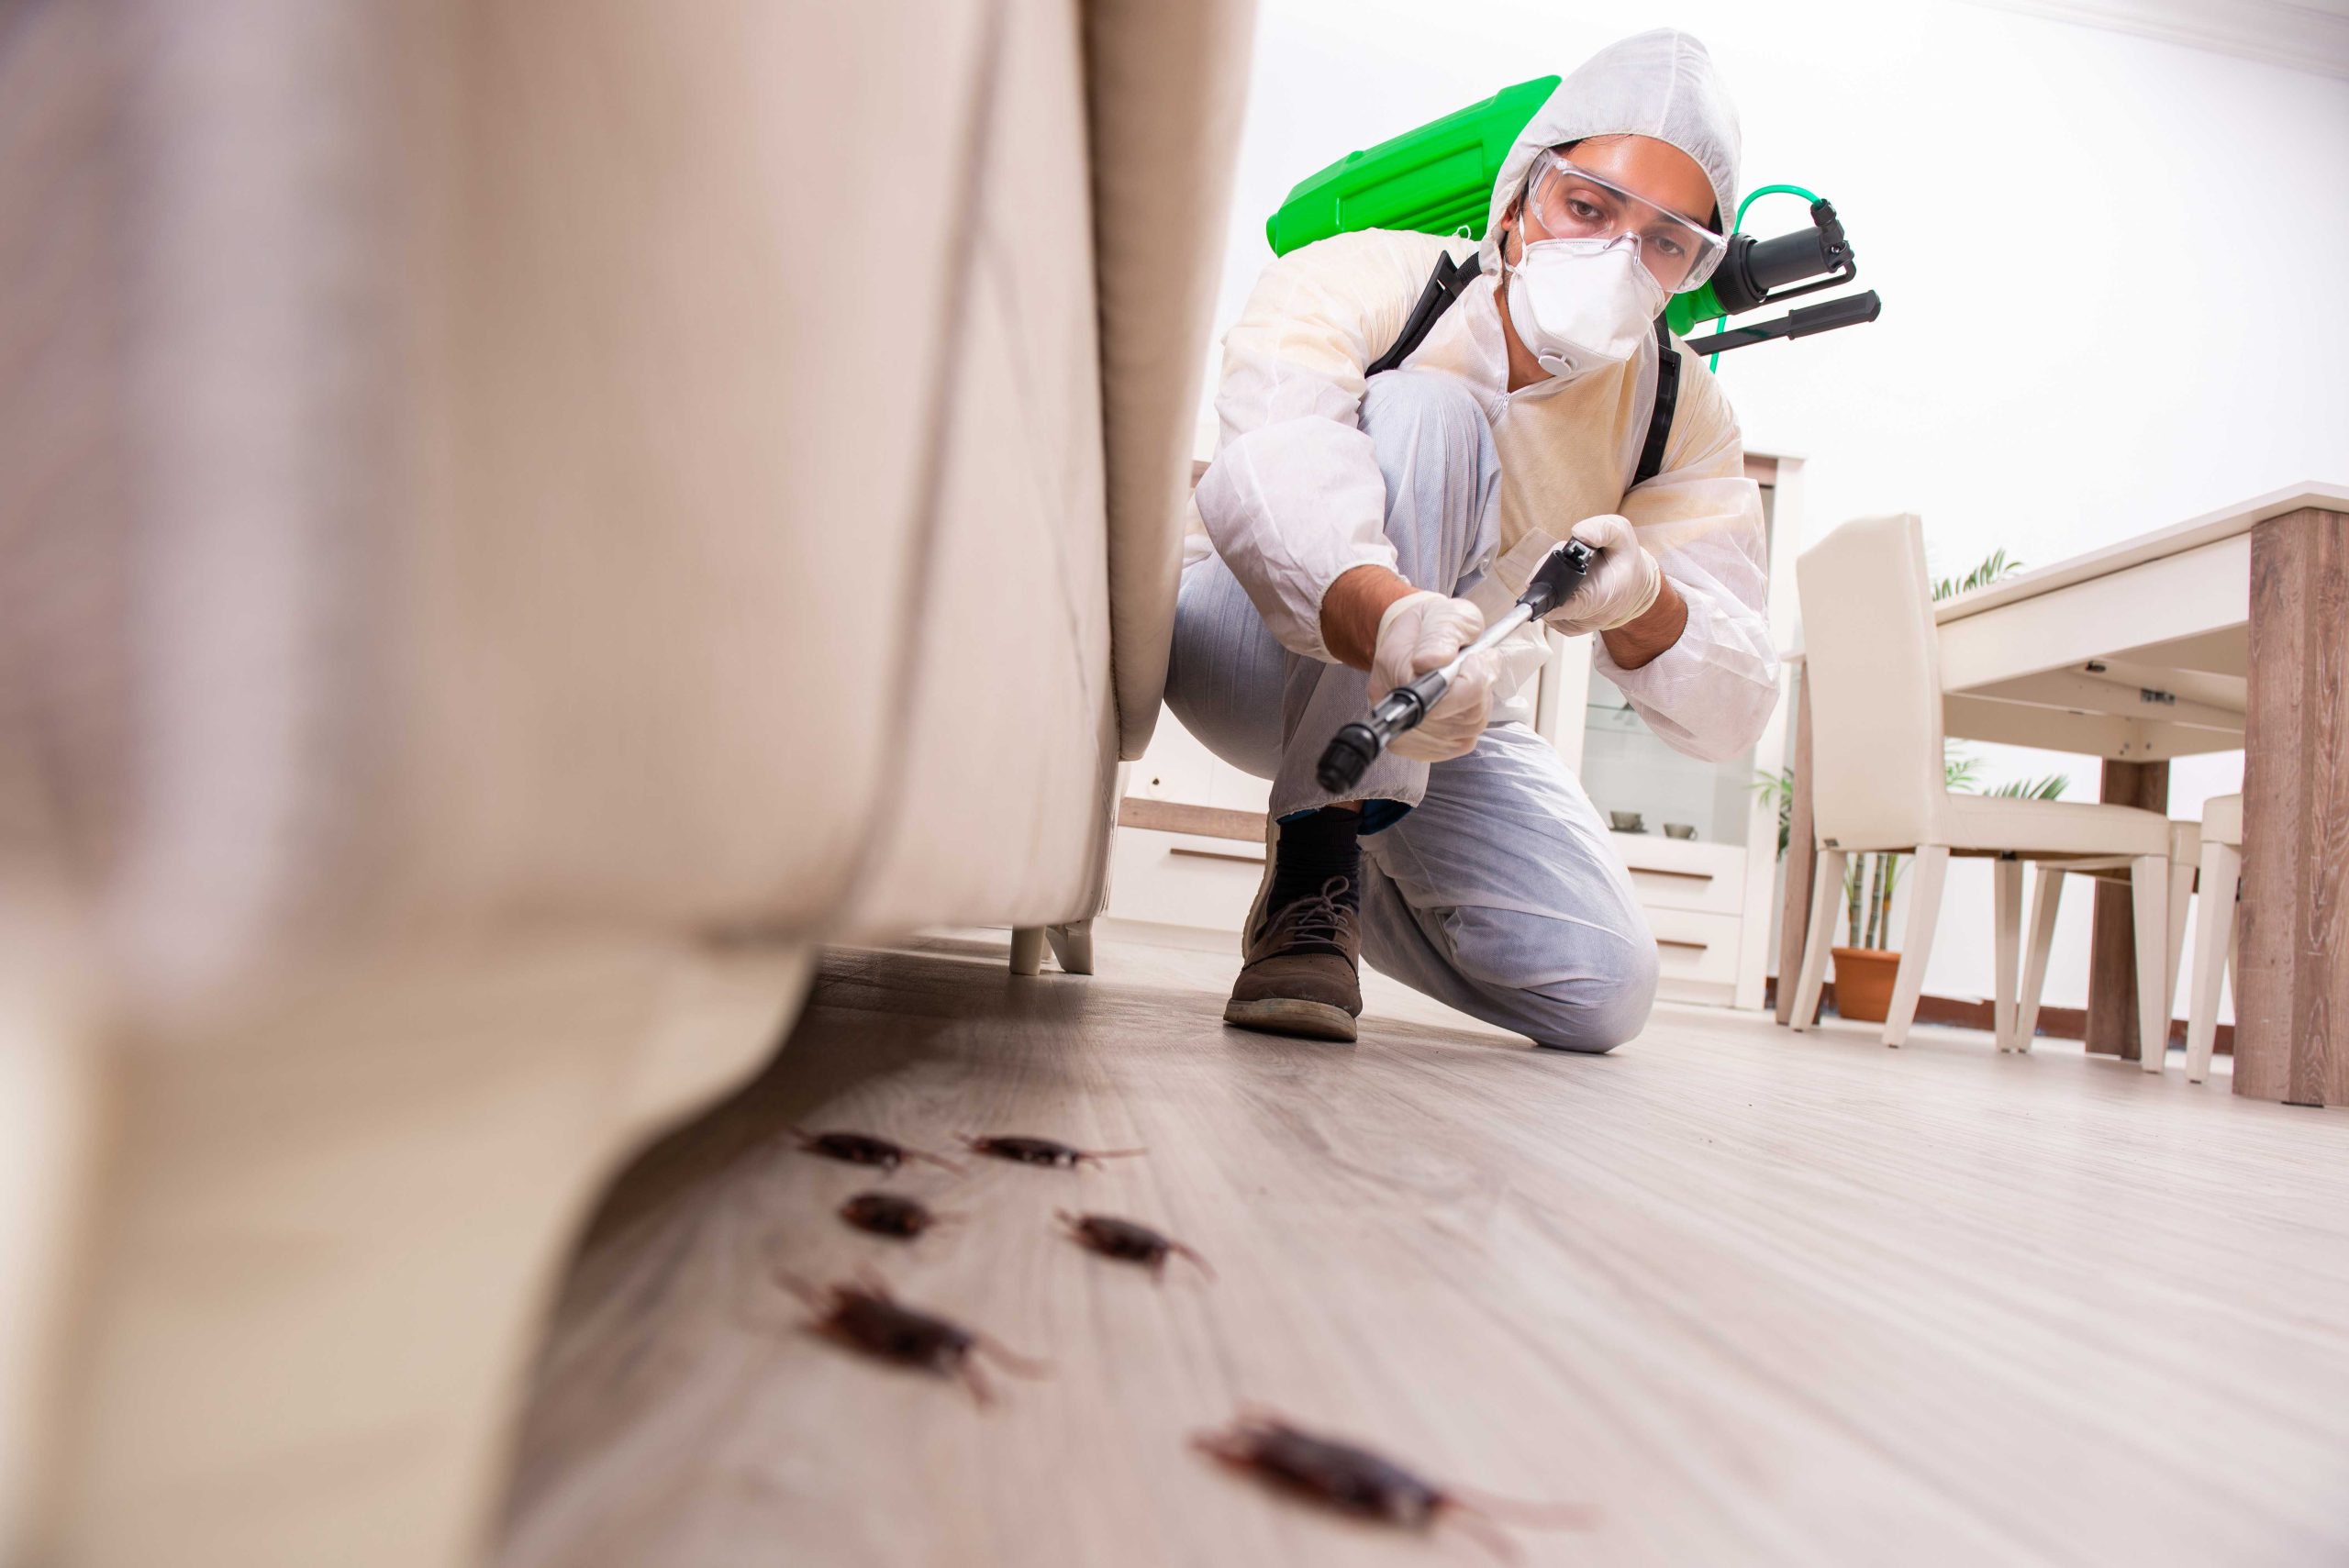 Pest Control Services in Maui